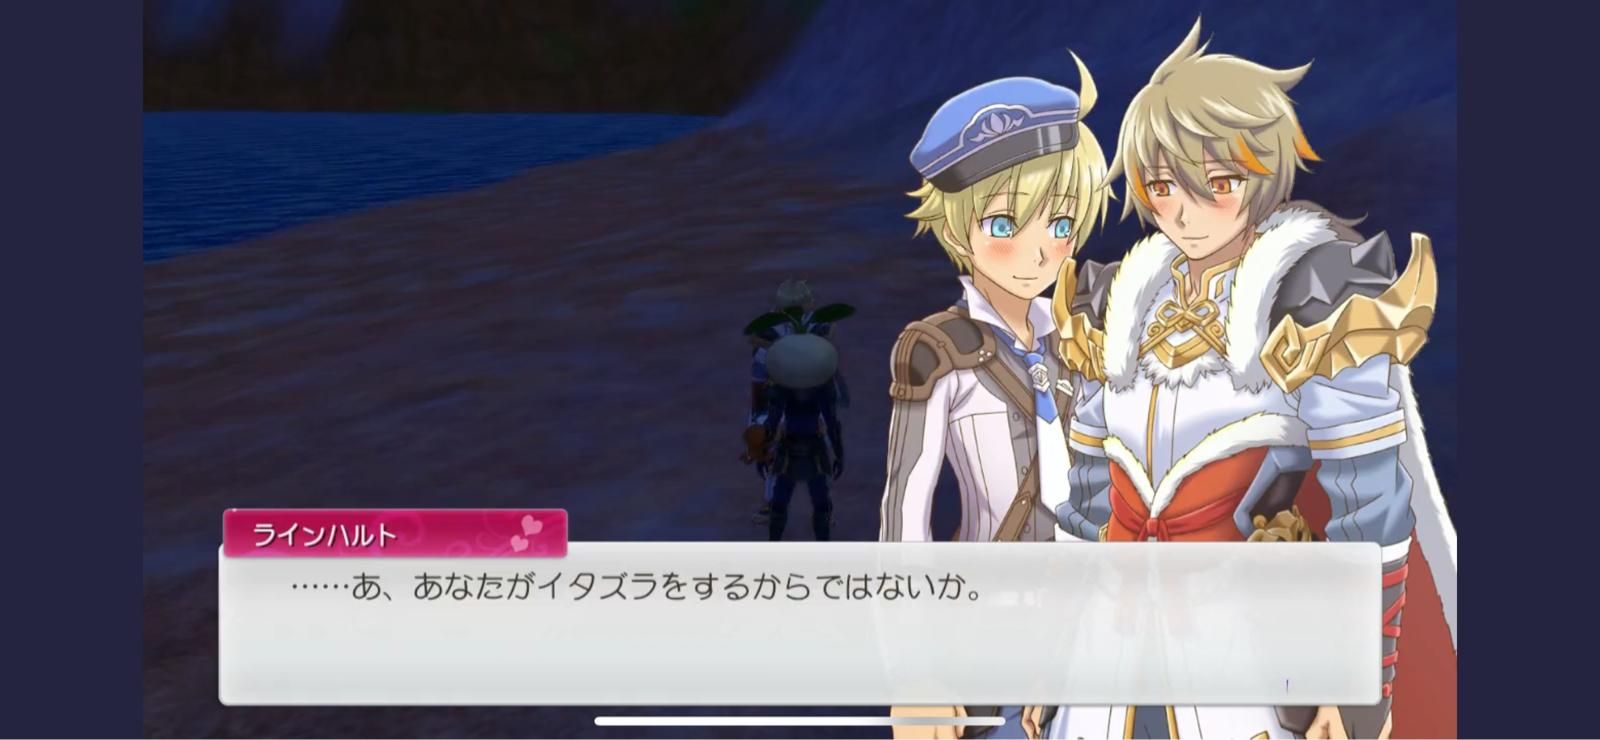 Rune Factory 5 Goes Up in Flames as Same-Sex Marriage Becomes Possible in Update 4